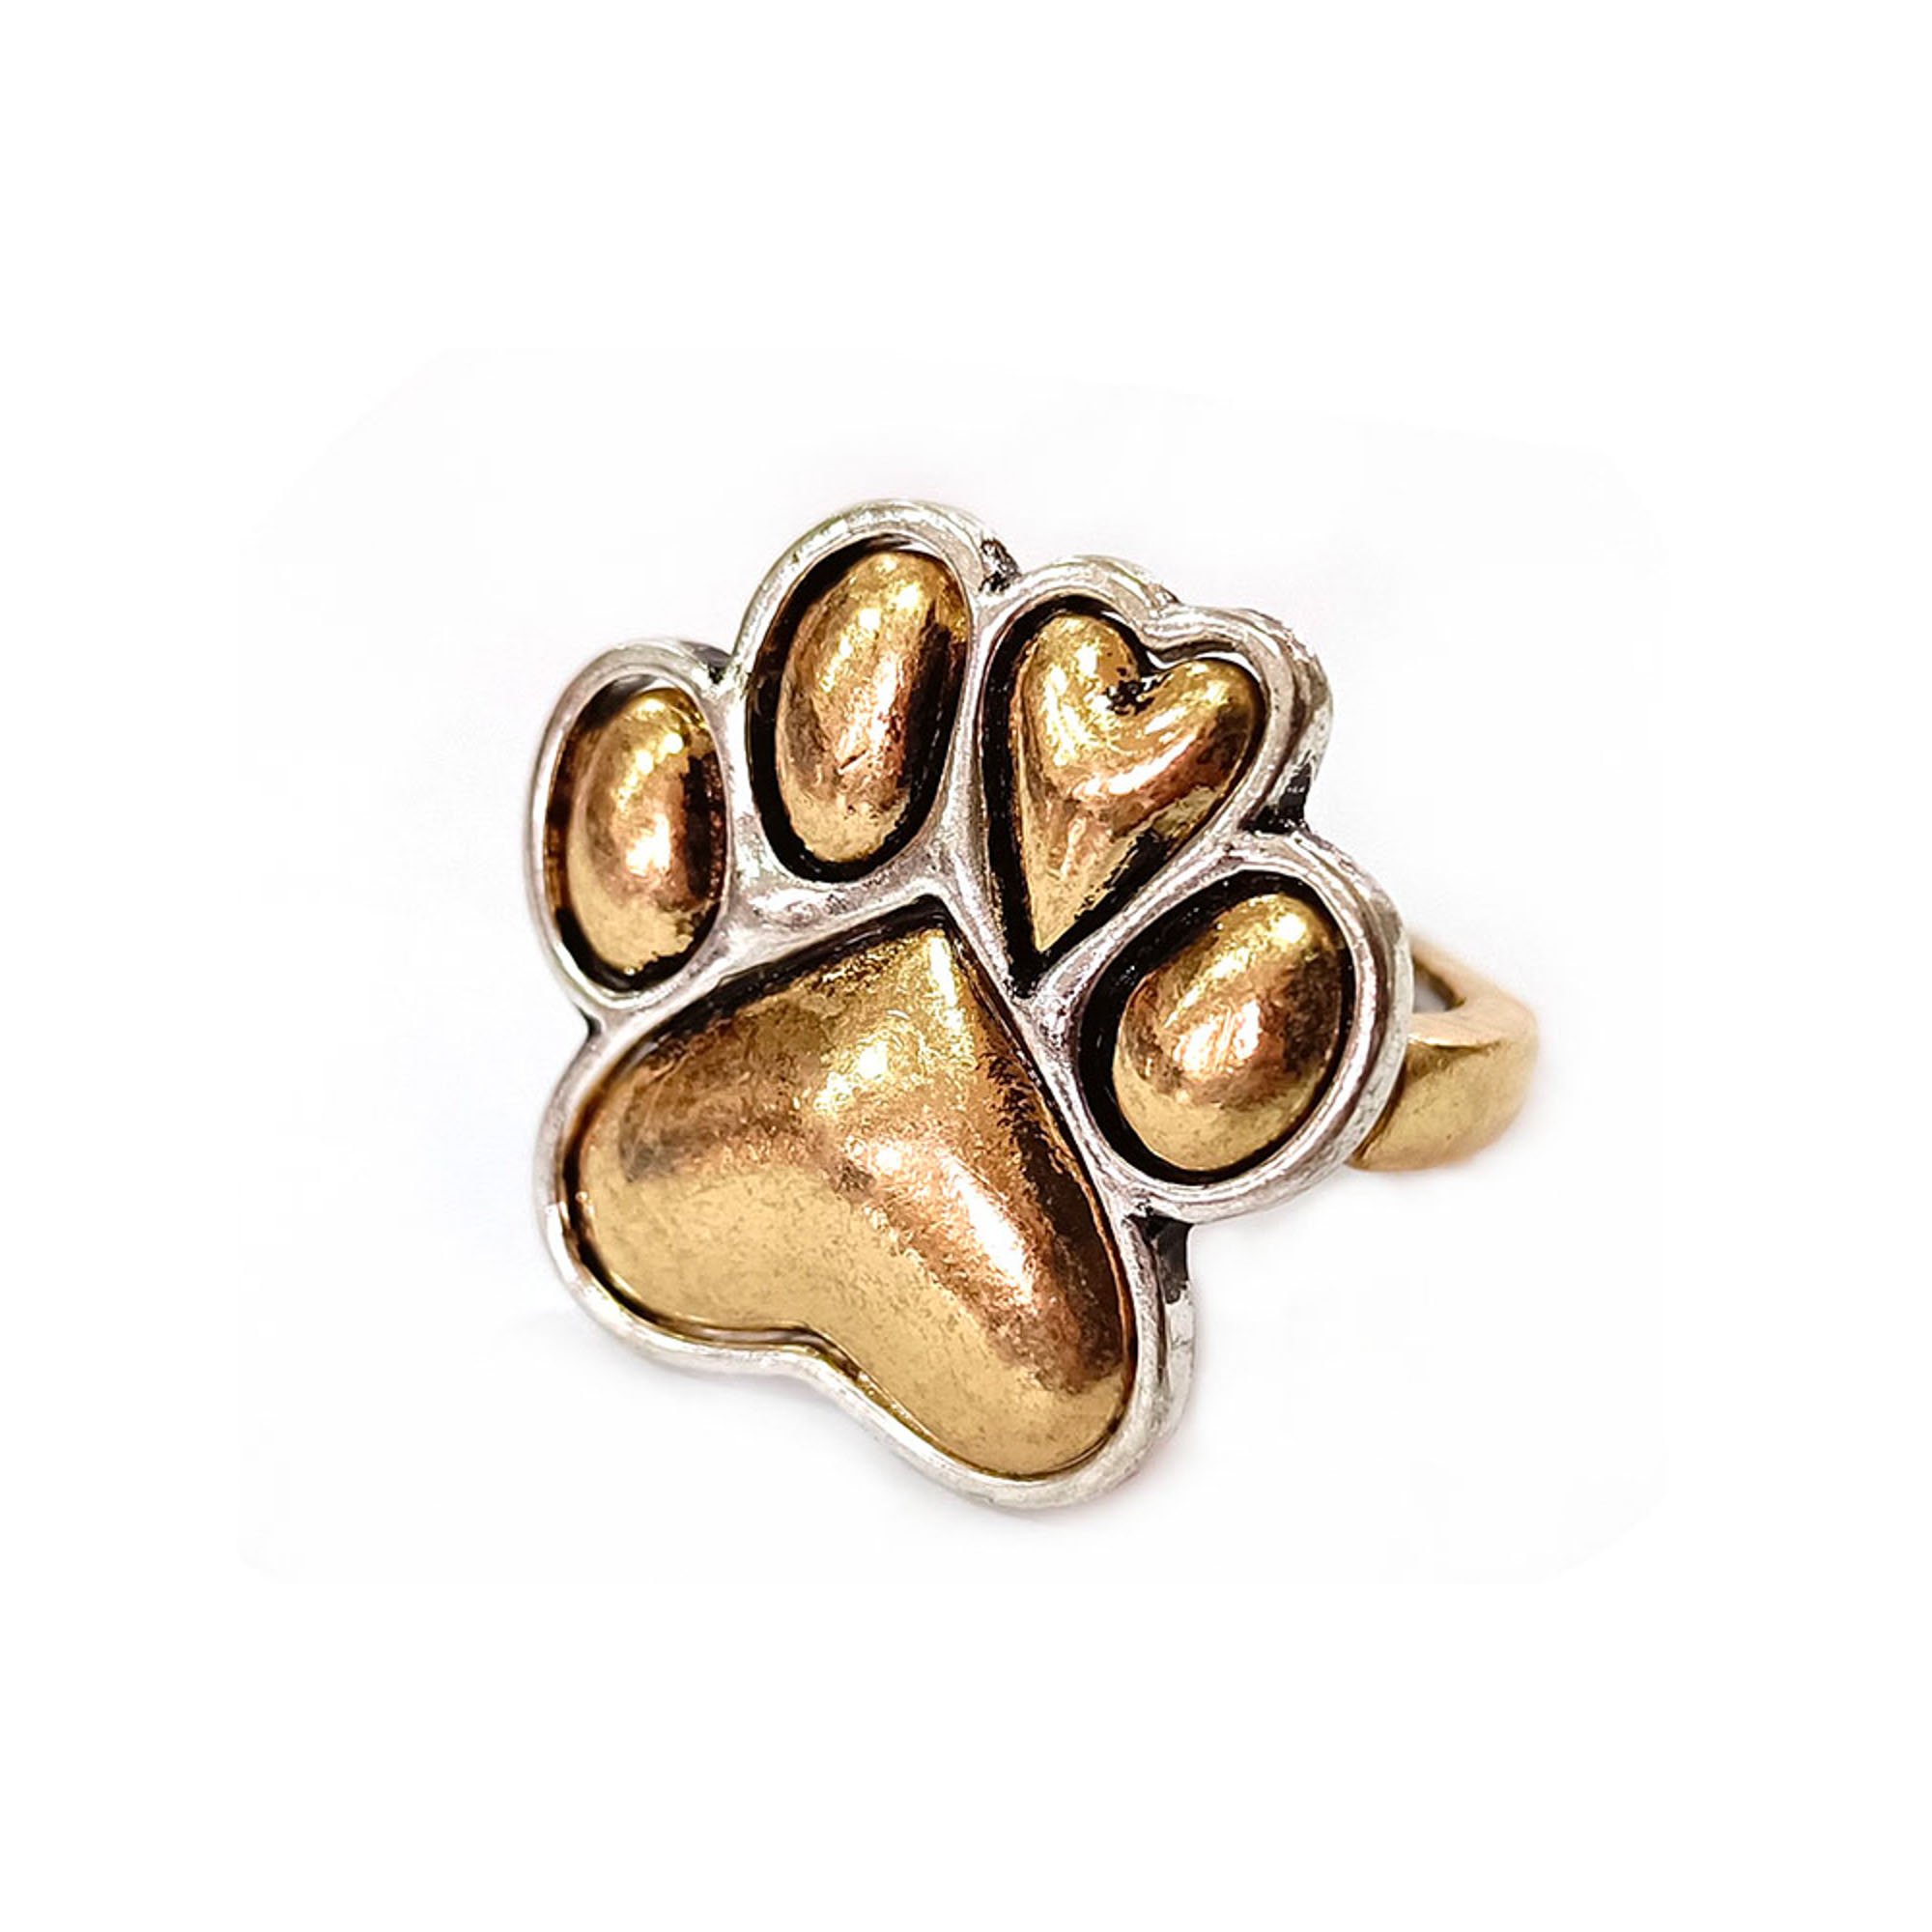 ANIMAL LOVERS - PAW STRETCH RING